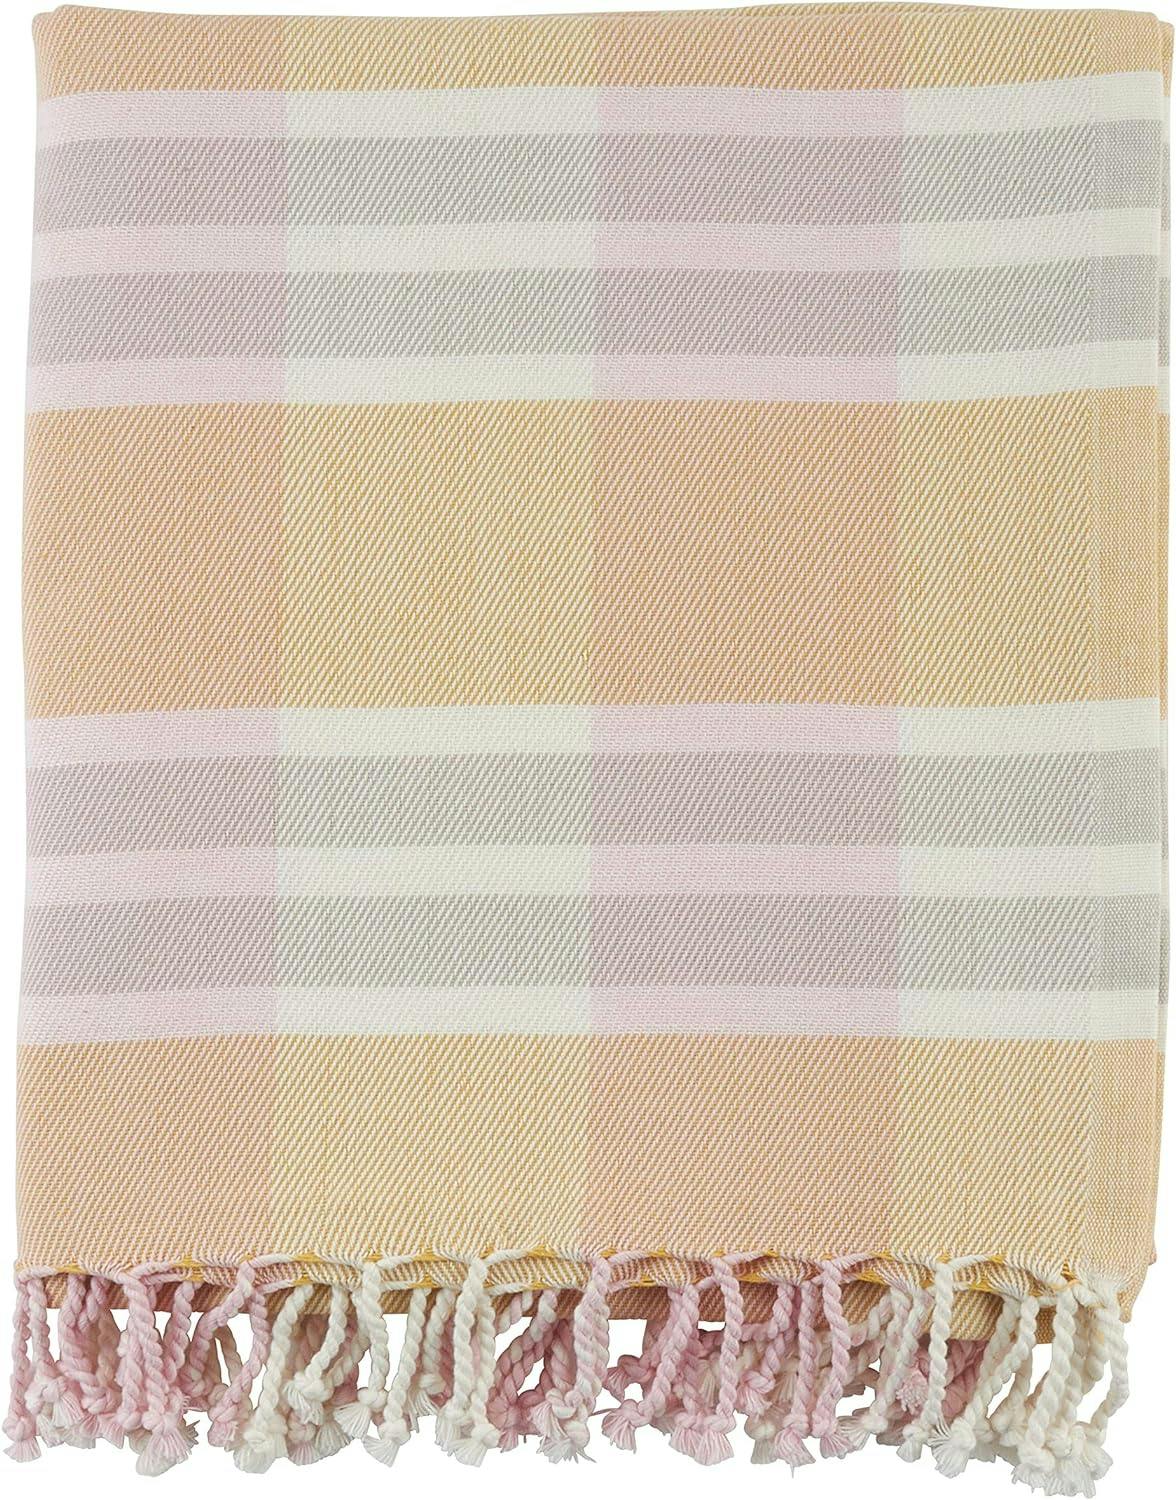 Cozy Classic 50x60 Cotton Plaid Throw in Grey, Yellow, and Red